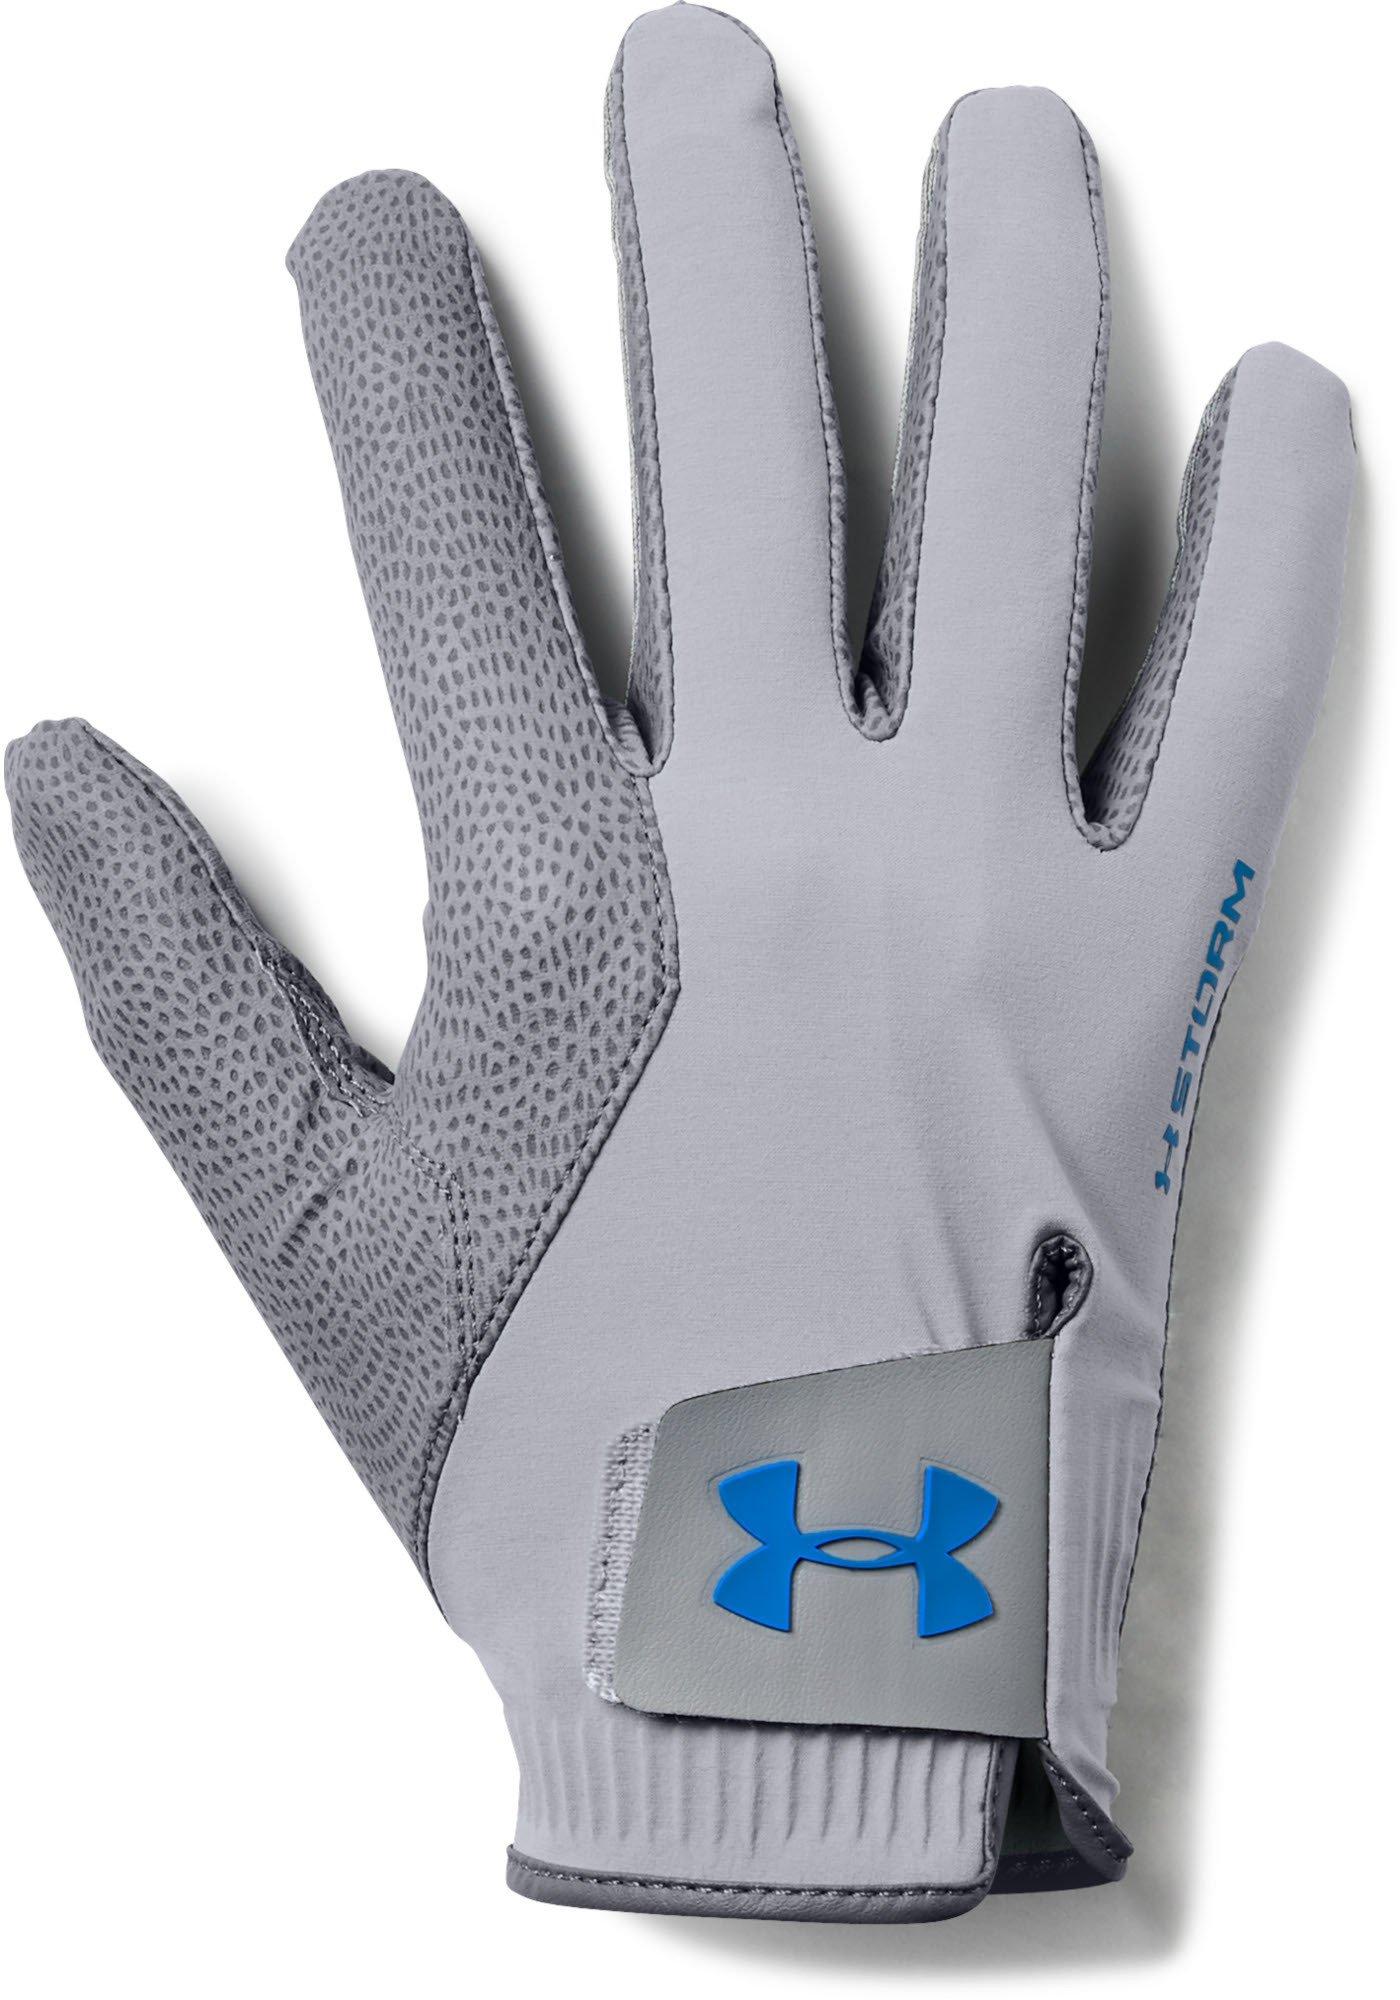 Under Armour Storm Golf Gloves-GRY XL